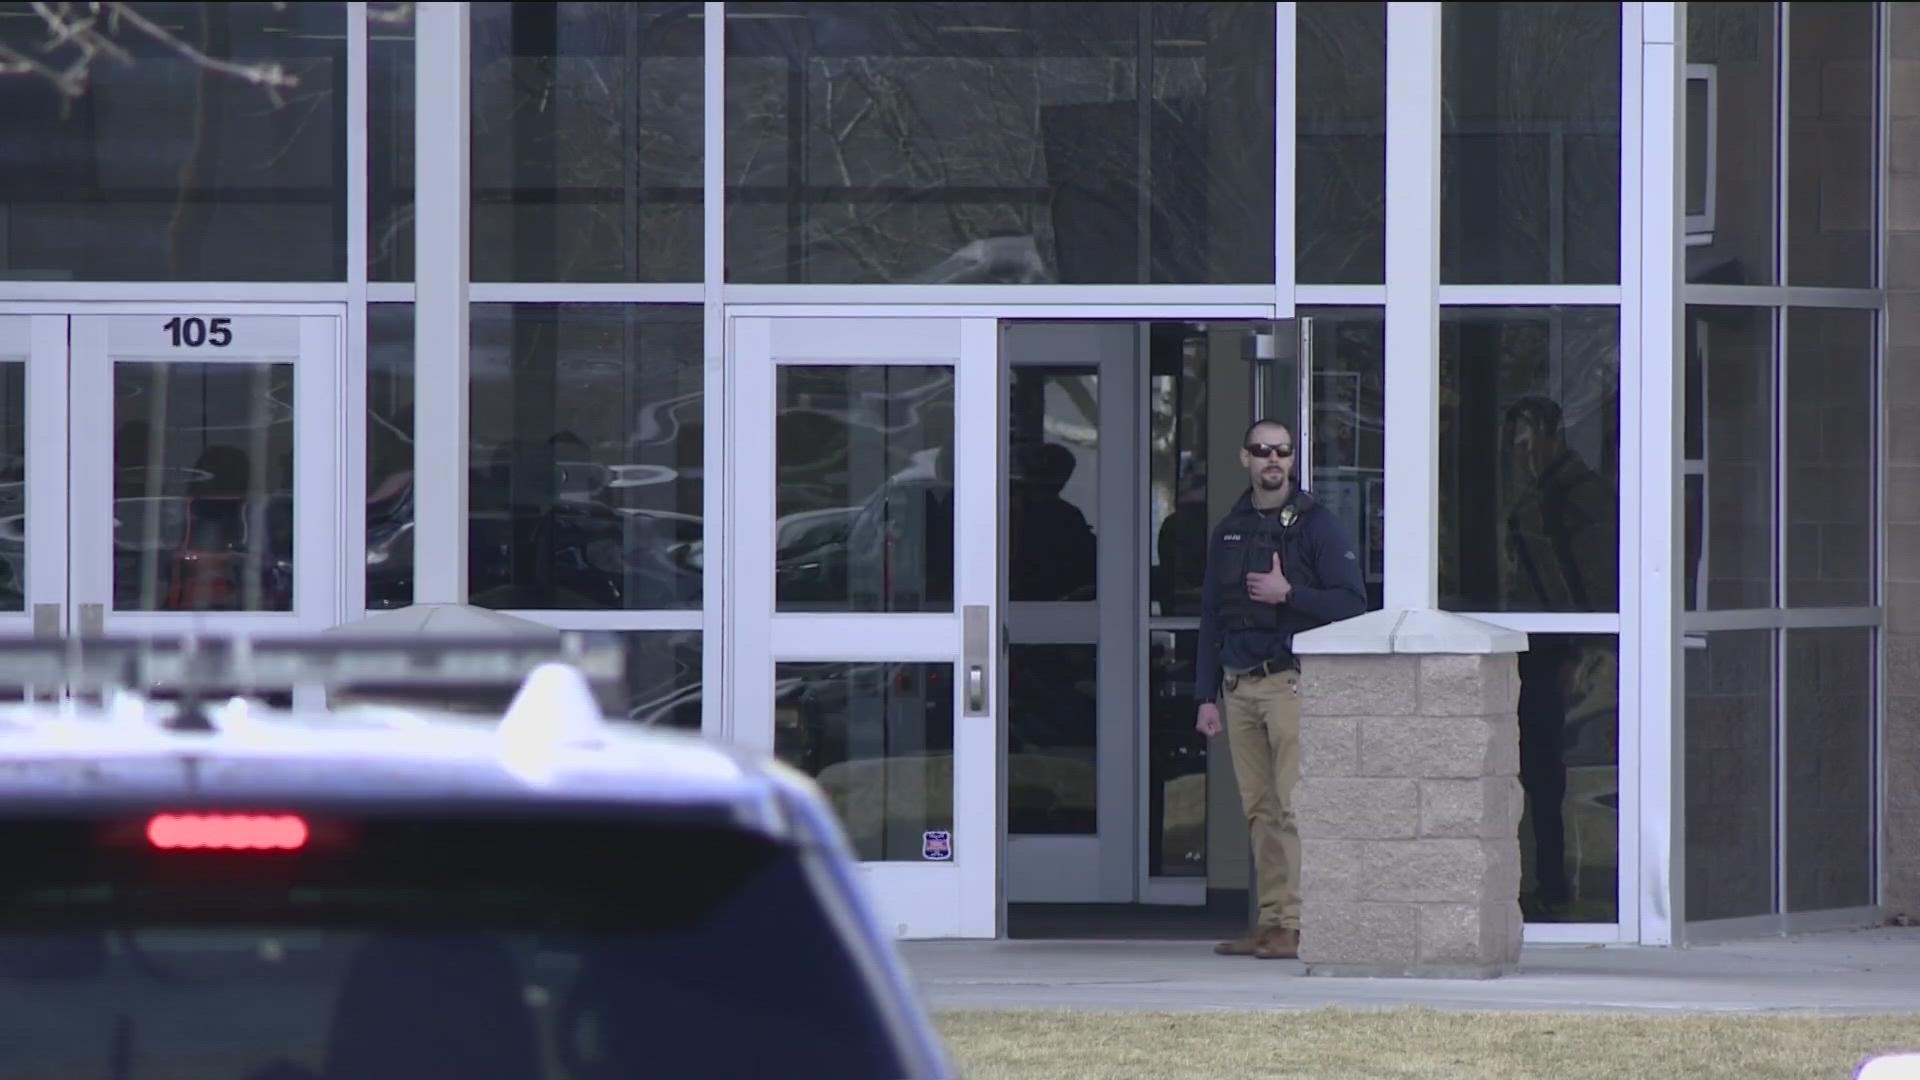 Police agencies confirmed the false threats of an active shooter at schools across southern Idaho Wednesday are part of a "nationwide hoax."